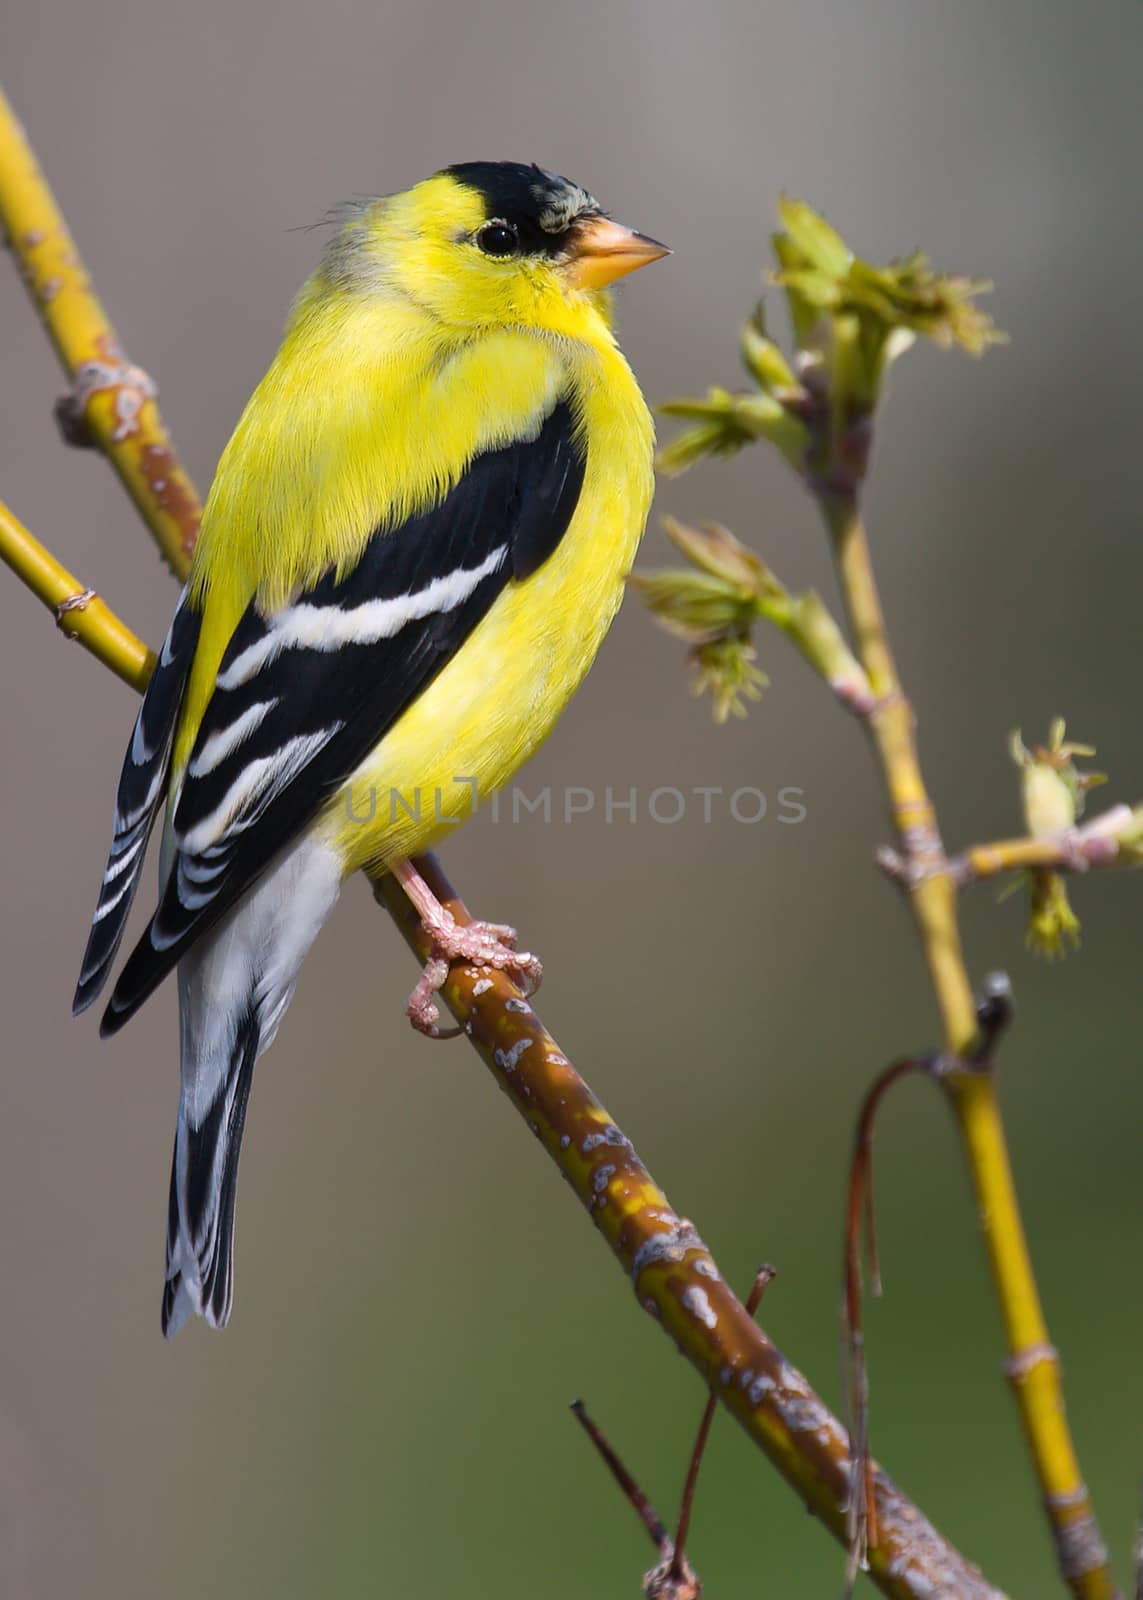 A beautiful Goldfinch perched on a branch.